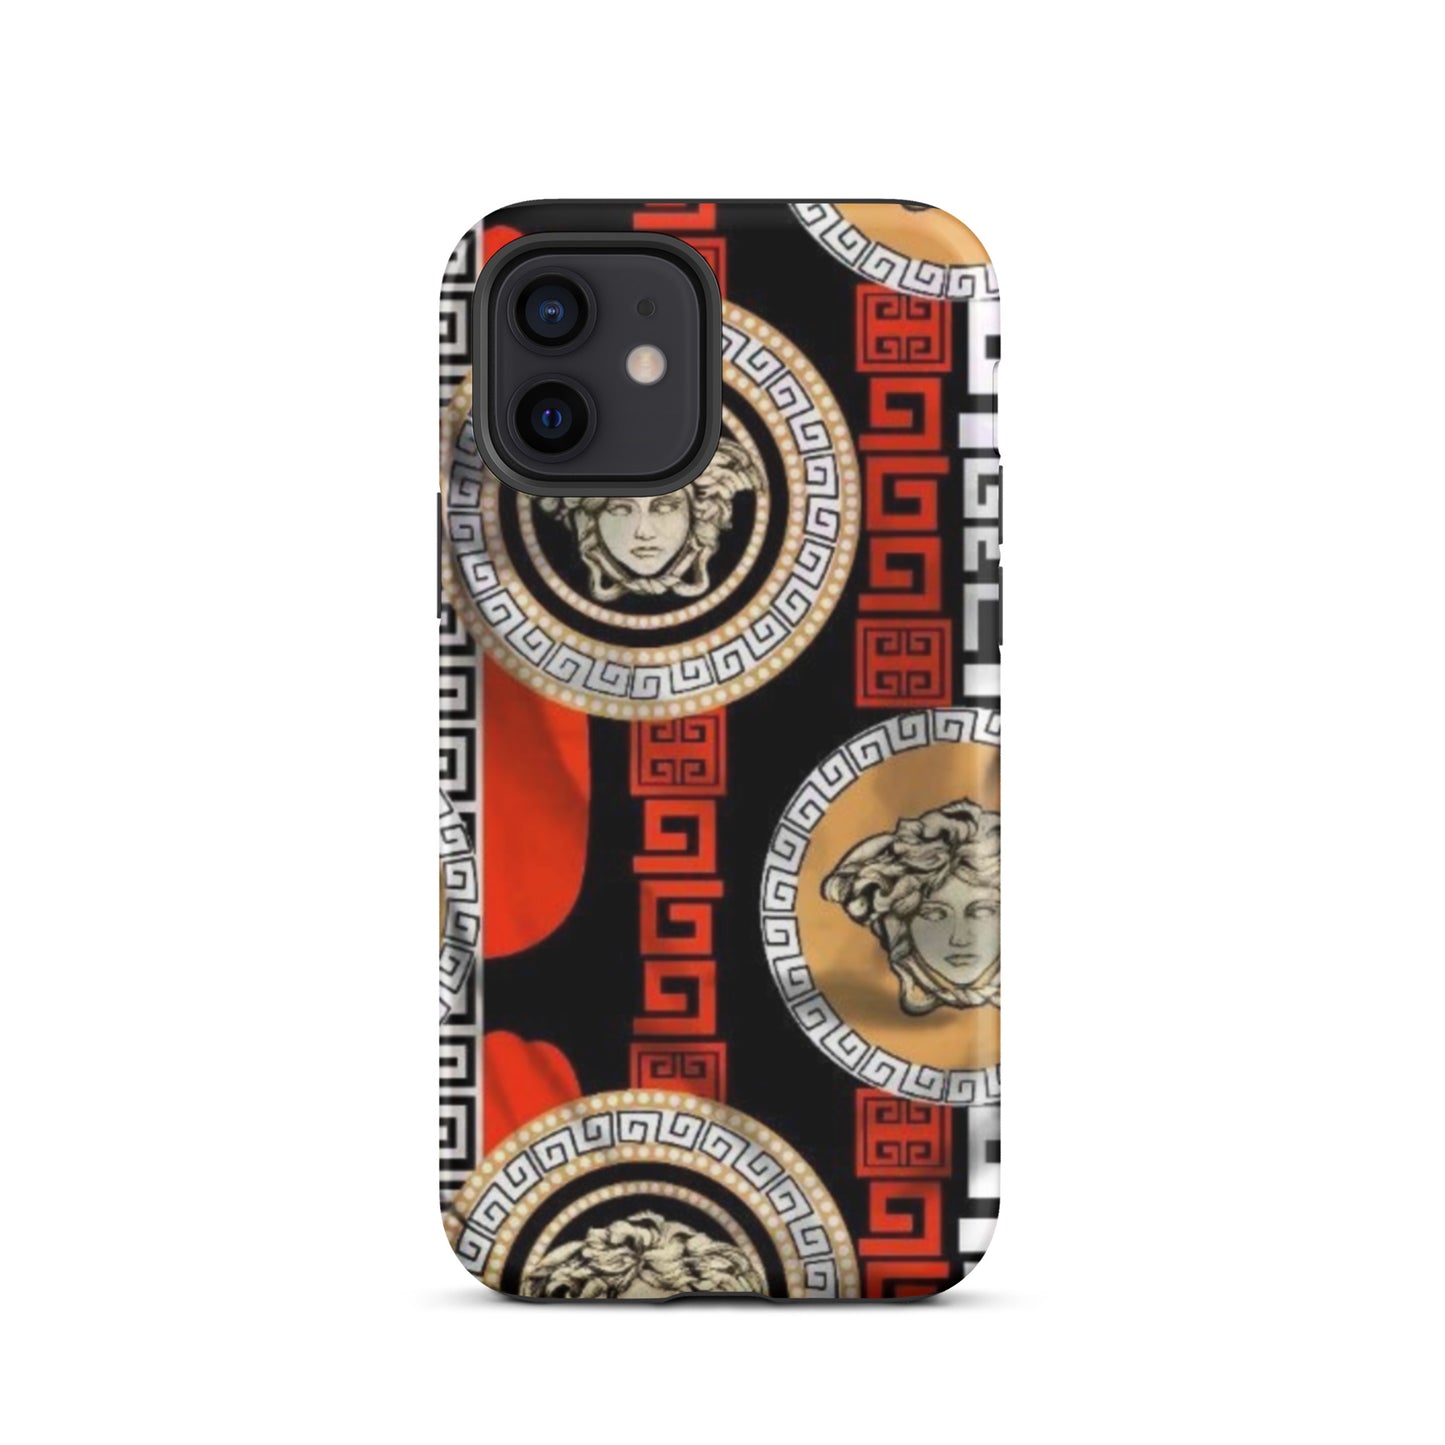 "Exclusive DOPiFiED" Tough iPhone case